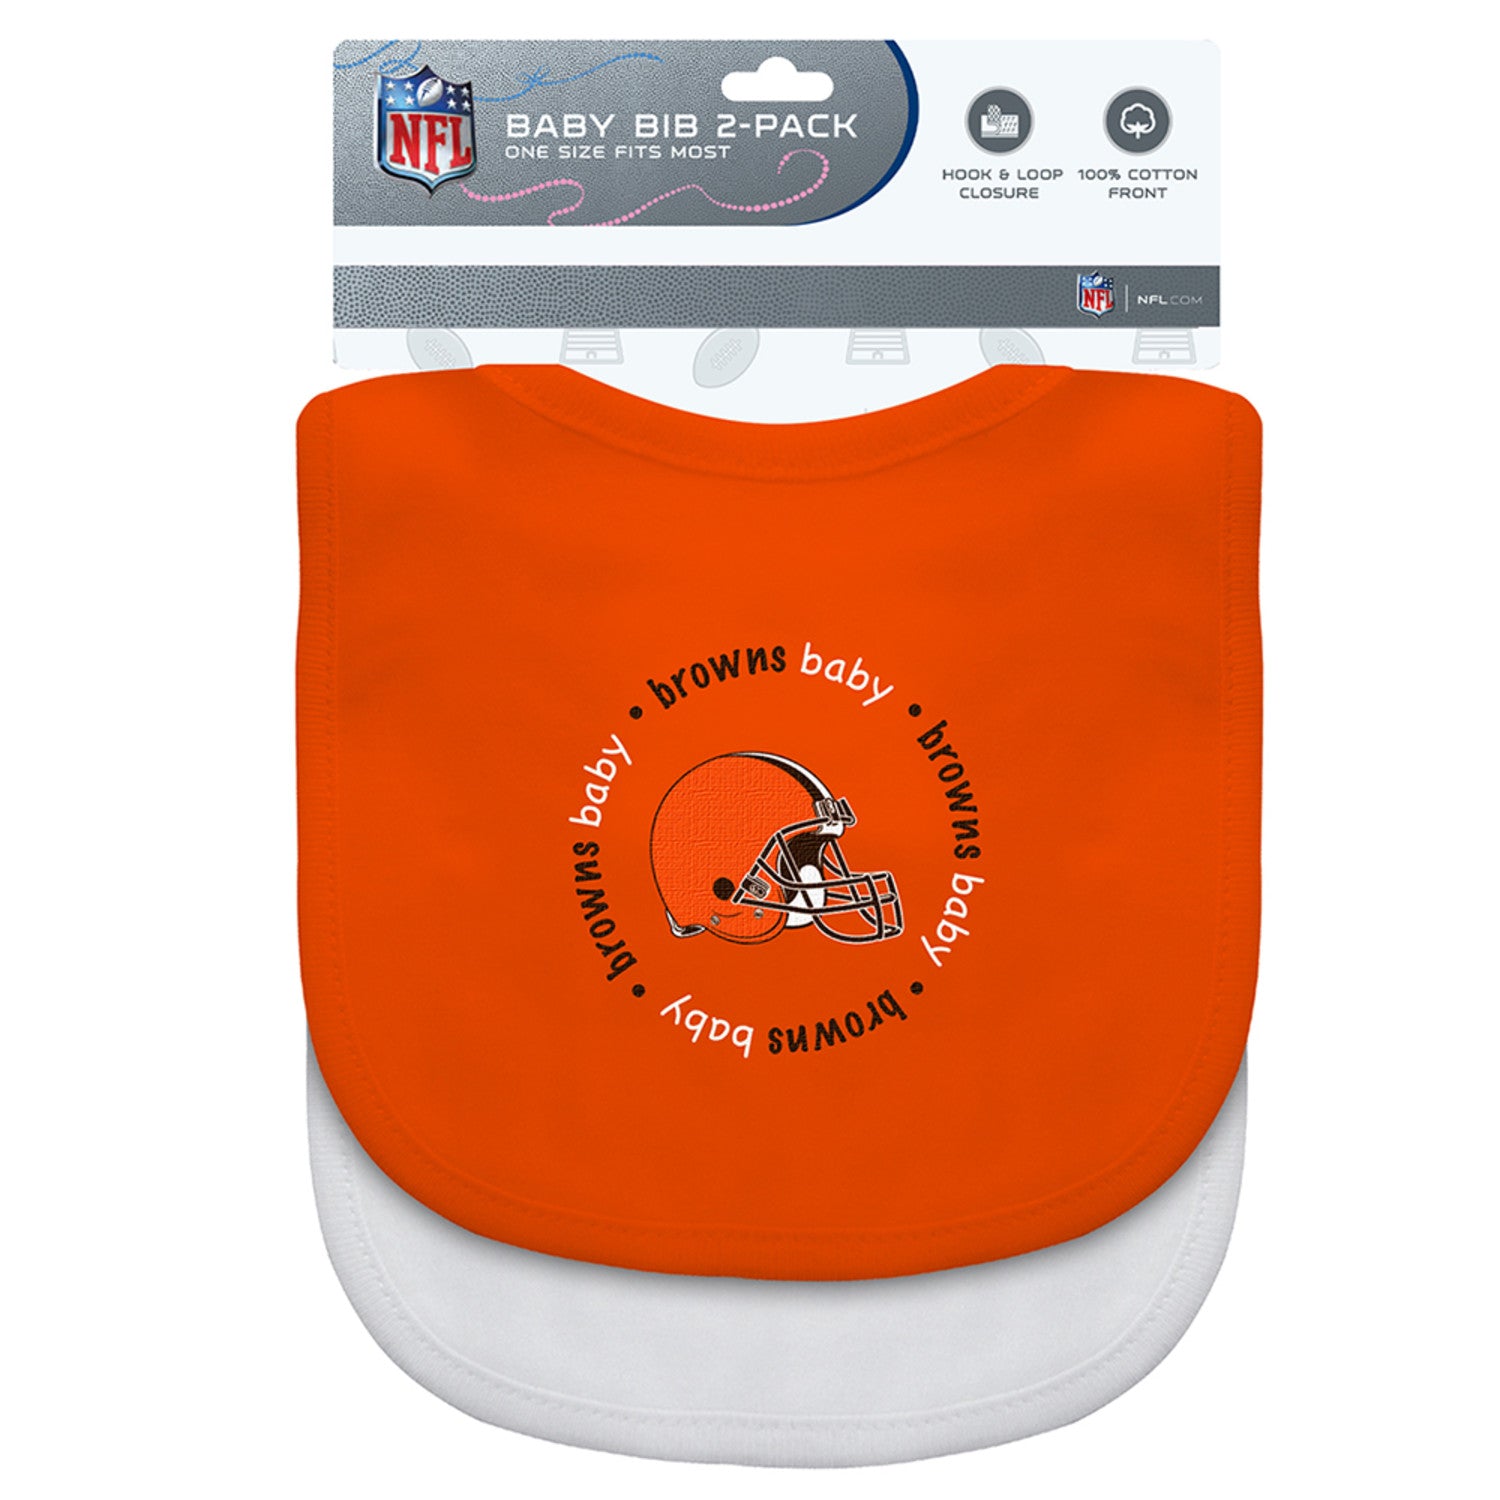 Cleveland Browns NFL Baby Bibs 2-Pack